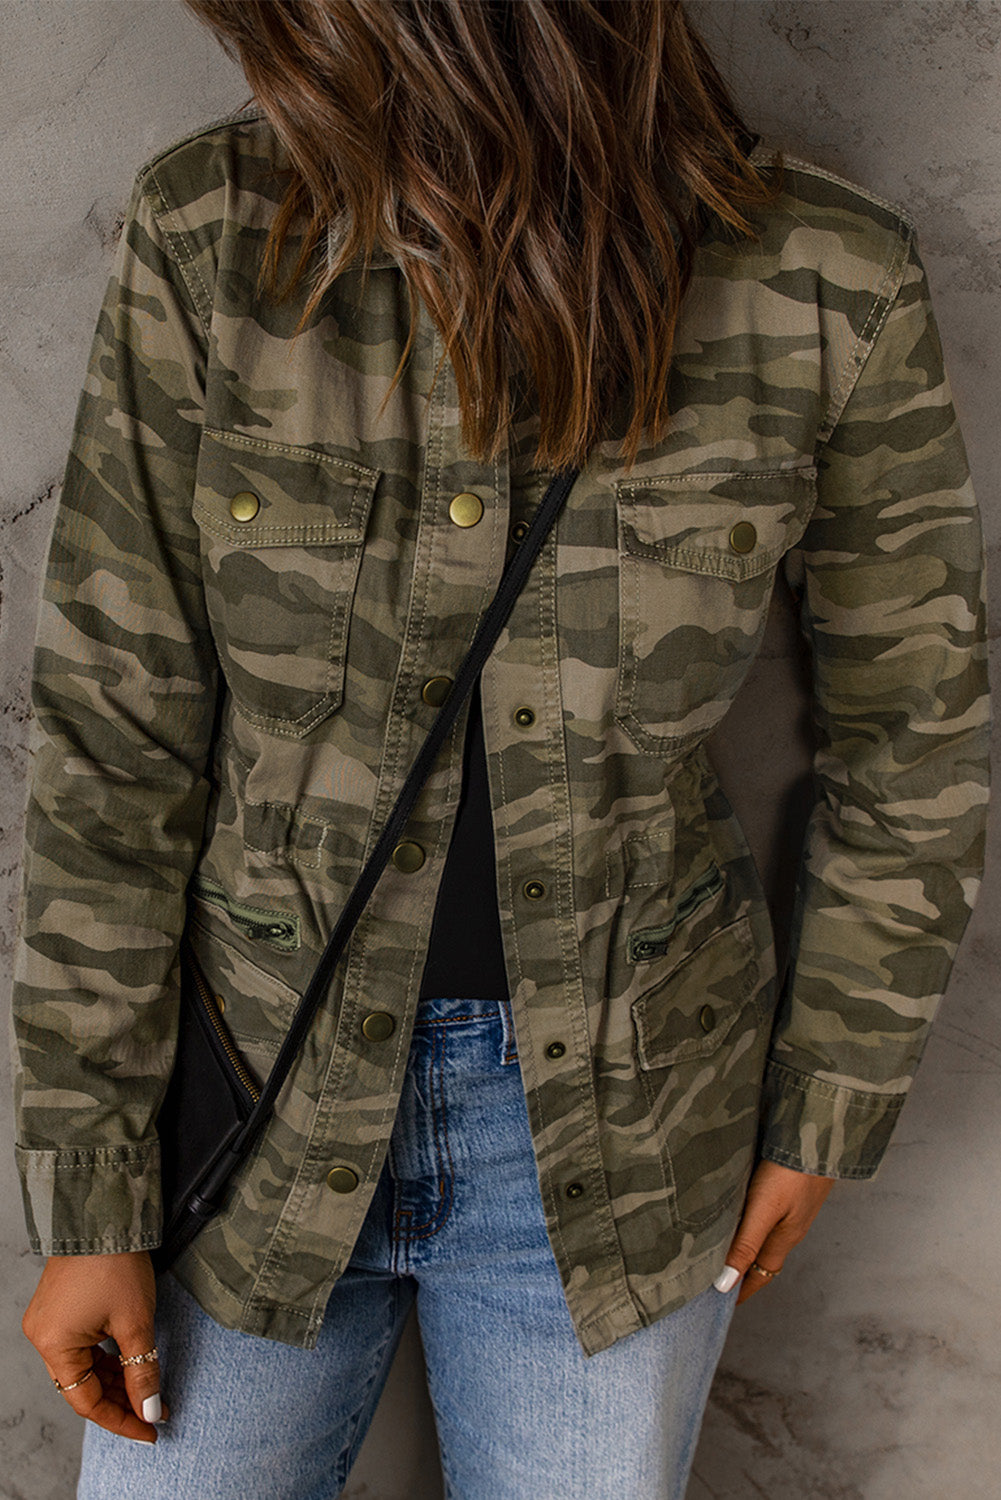 Double Take Camouflage Snap Down Jacket